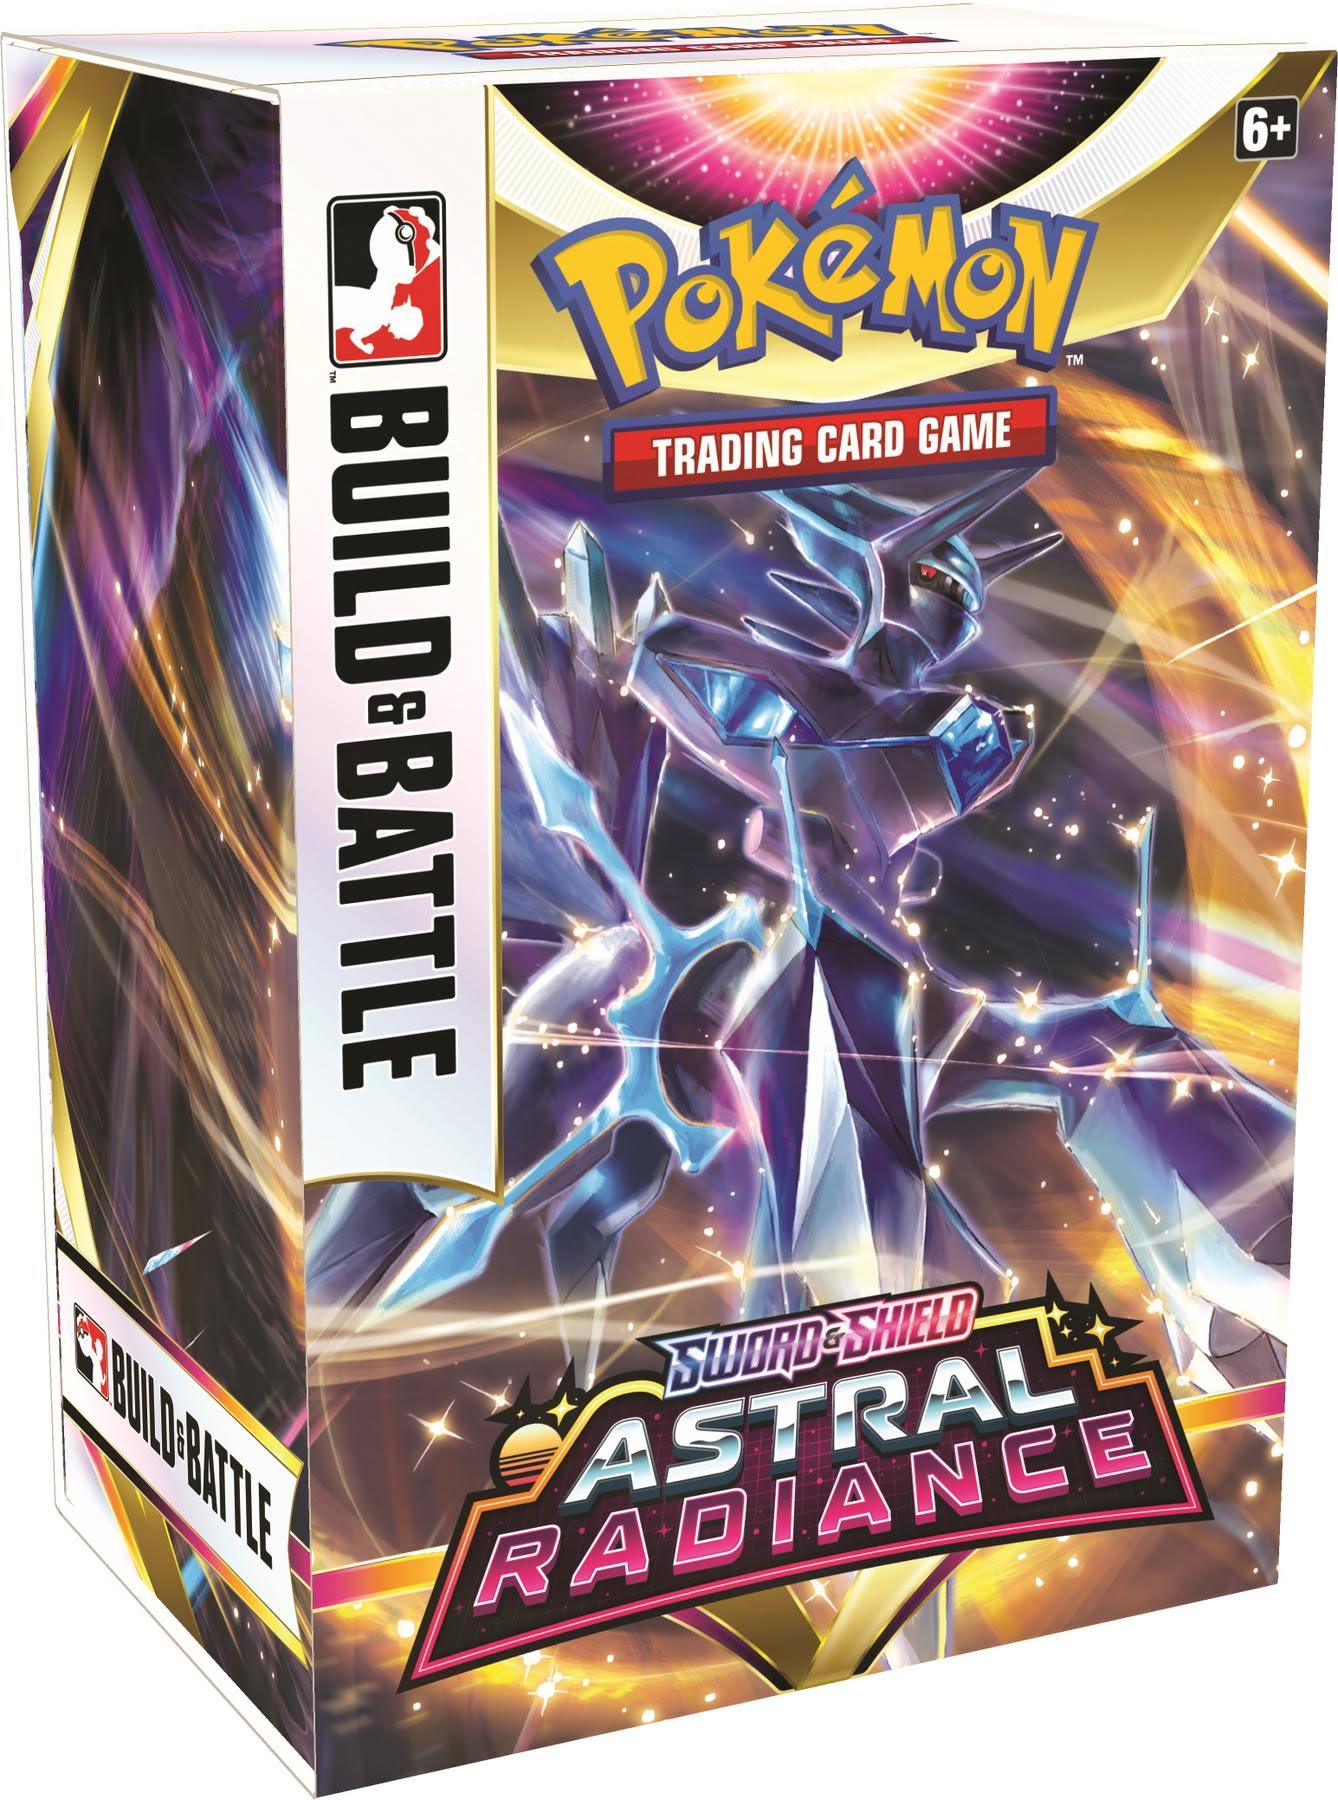 Pokemon TCG Sword and Shield Astral Radiance Build & Battle Box